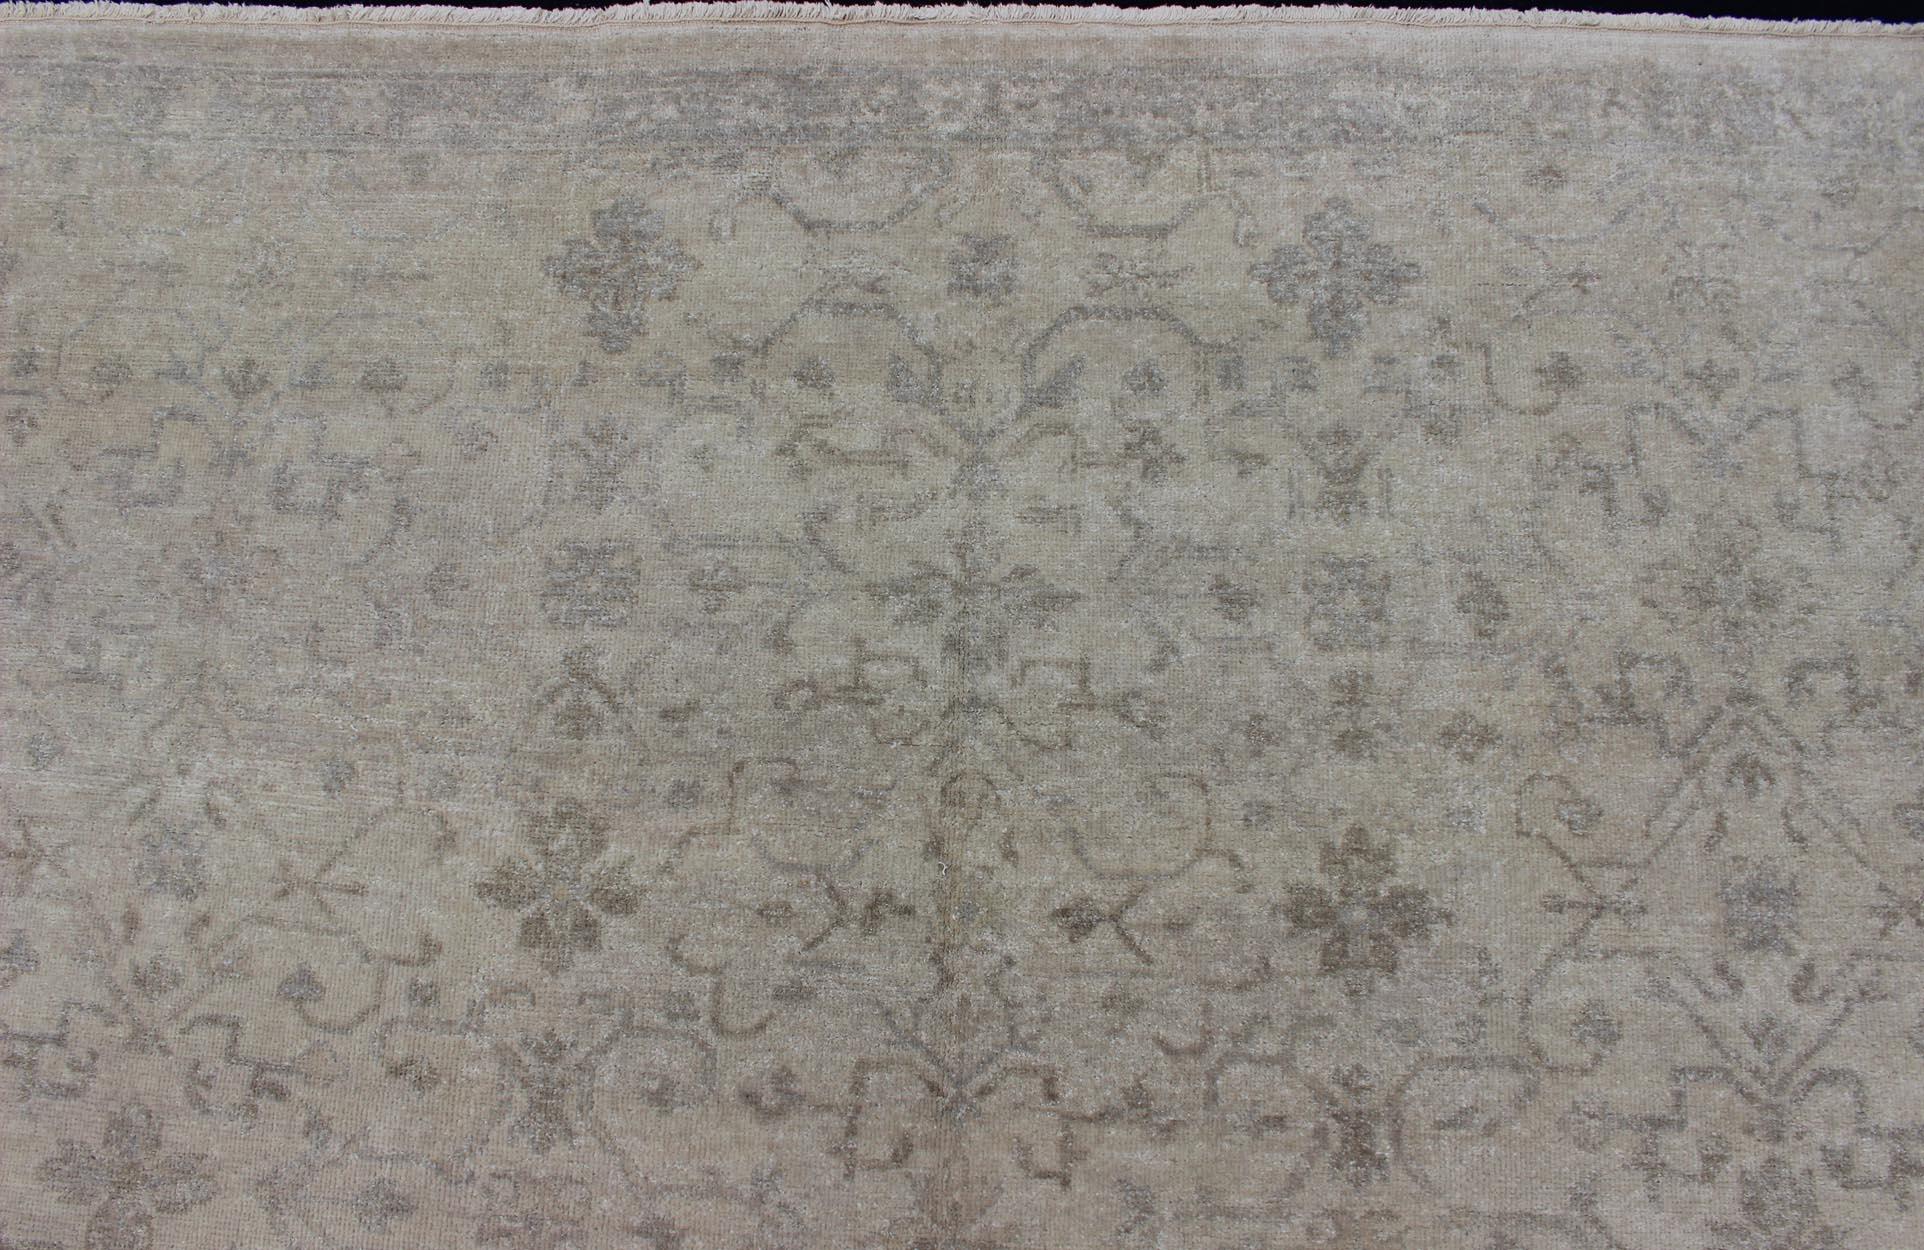 Large Transitional Rug with All-Over Design in Tan, Gray, Silver, Light Taupe For Sale 2